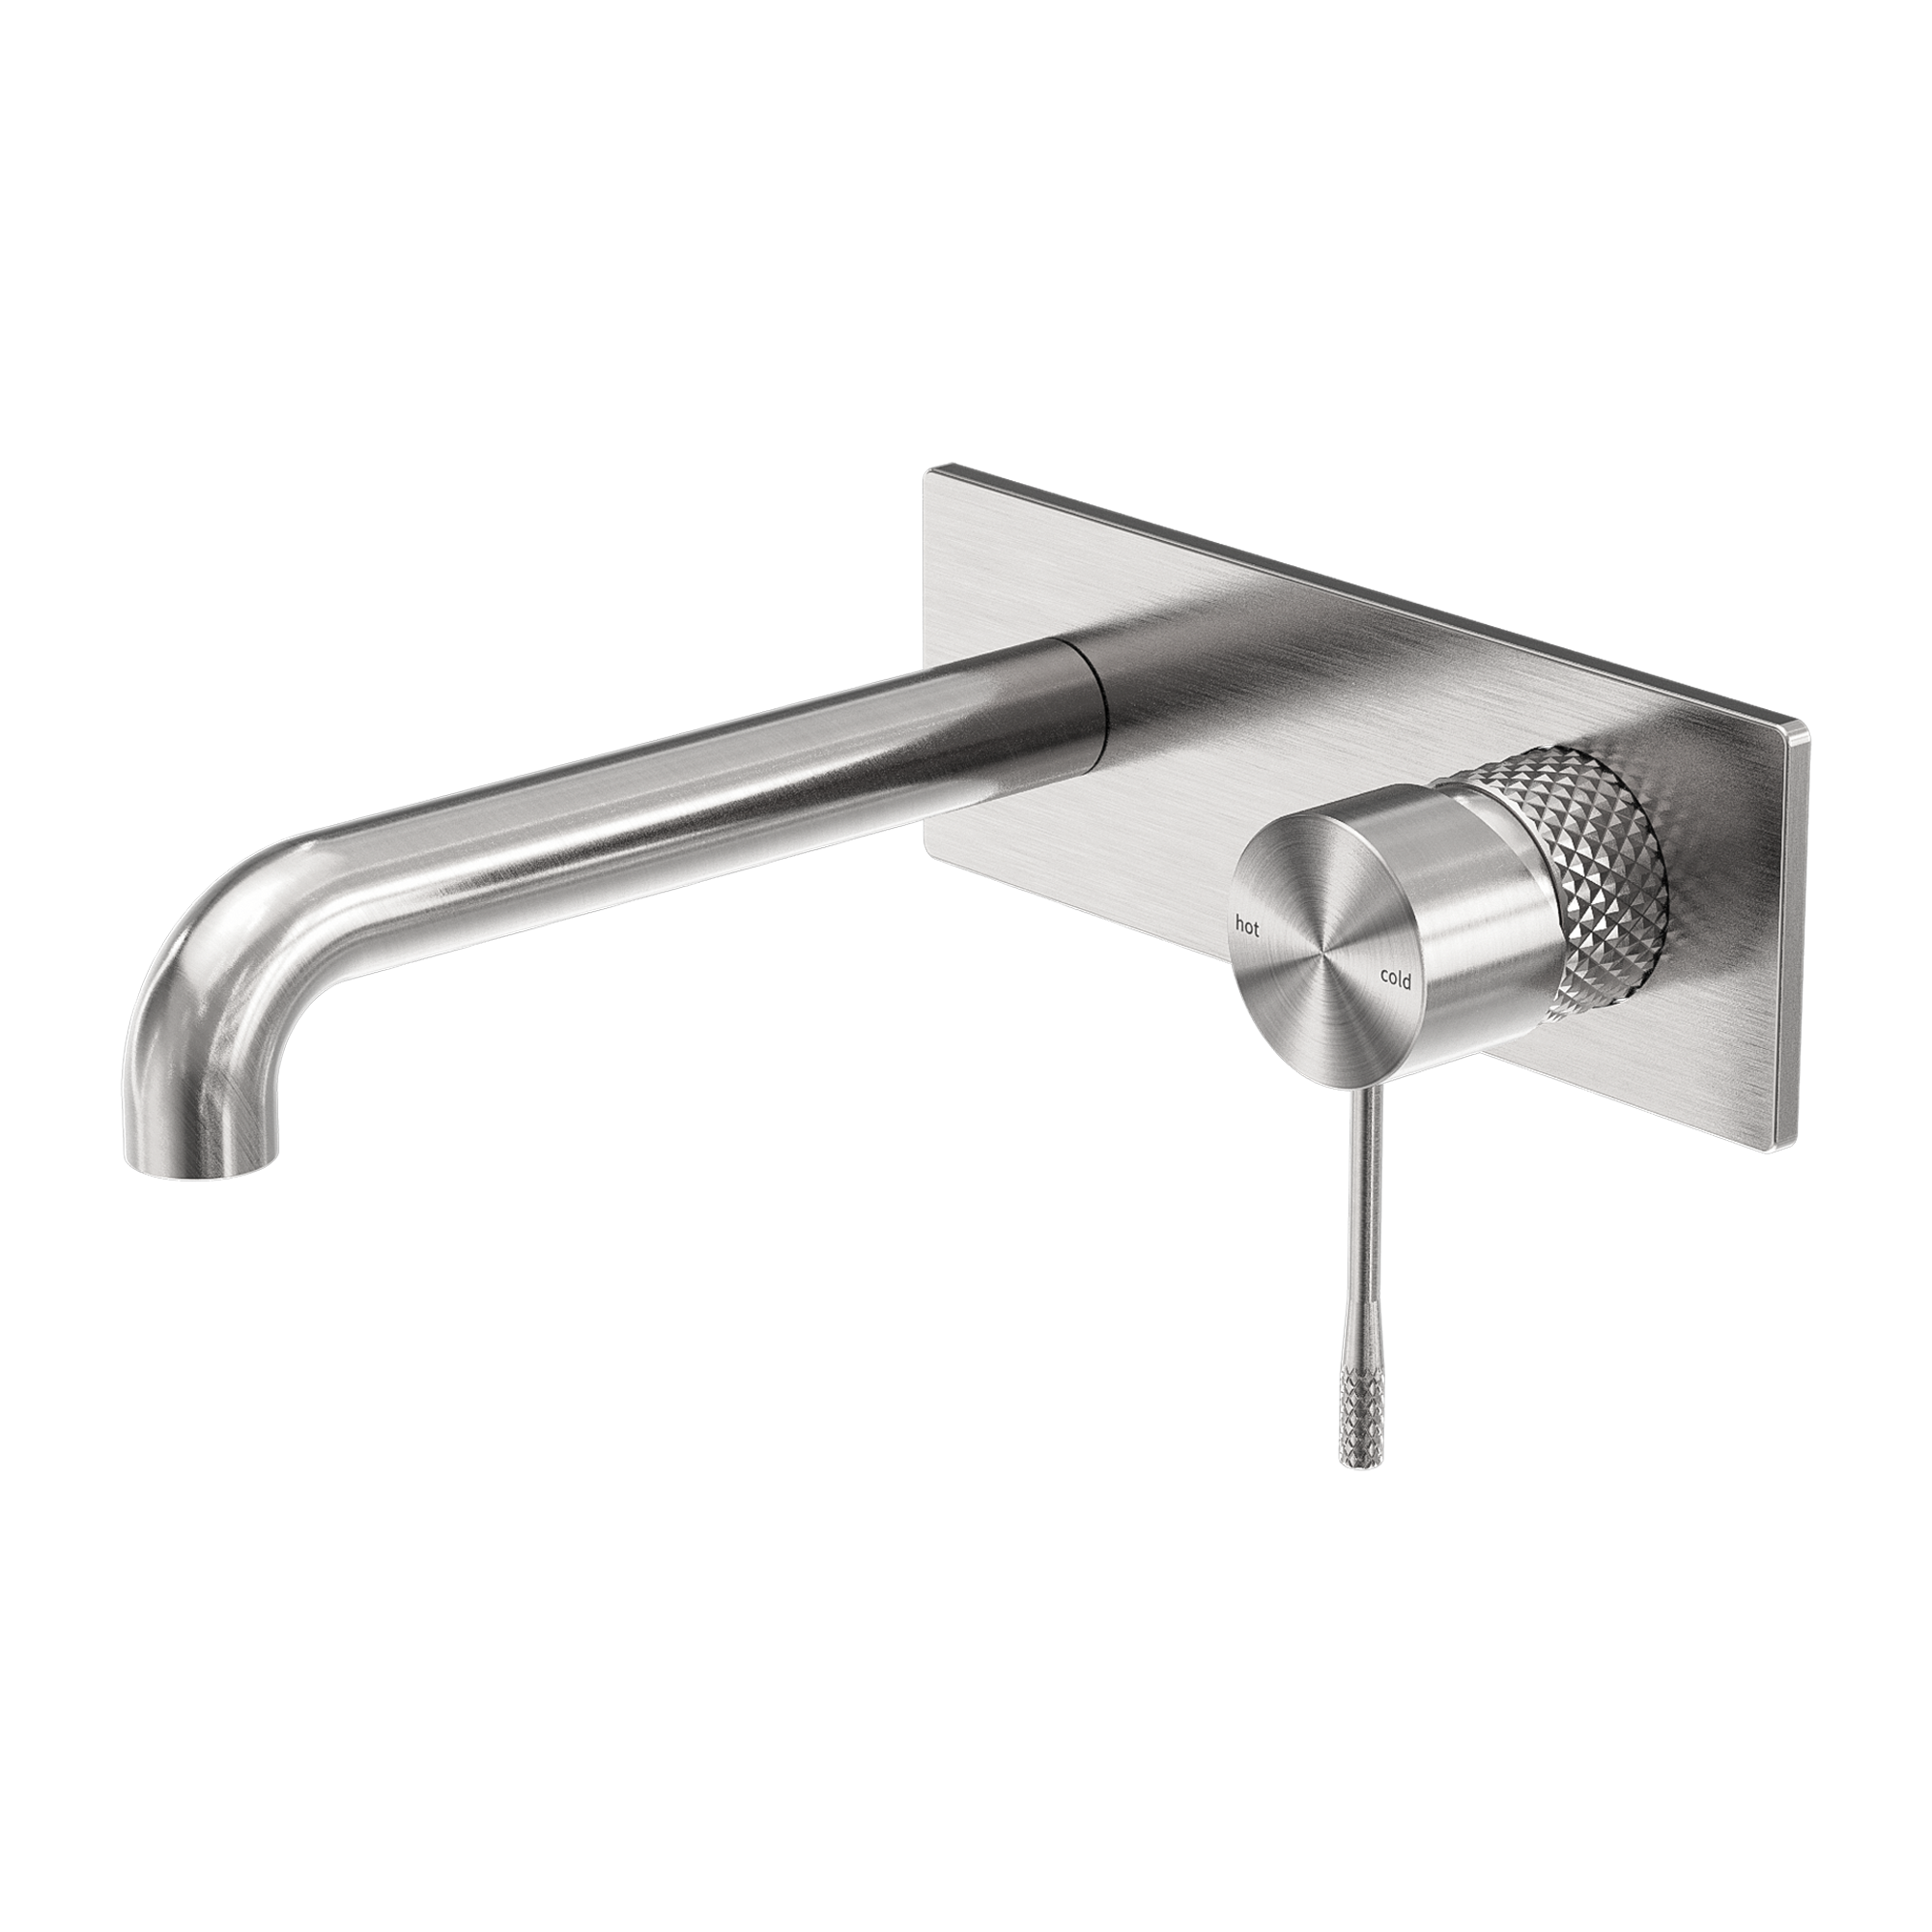 NERO OPAL WALL BASIN/ BATH MIXER BRUSHED NICKEL (AVAILABLE IN 120MM, 160MM, 185MM, 230MM AND 260MM)